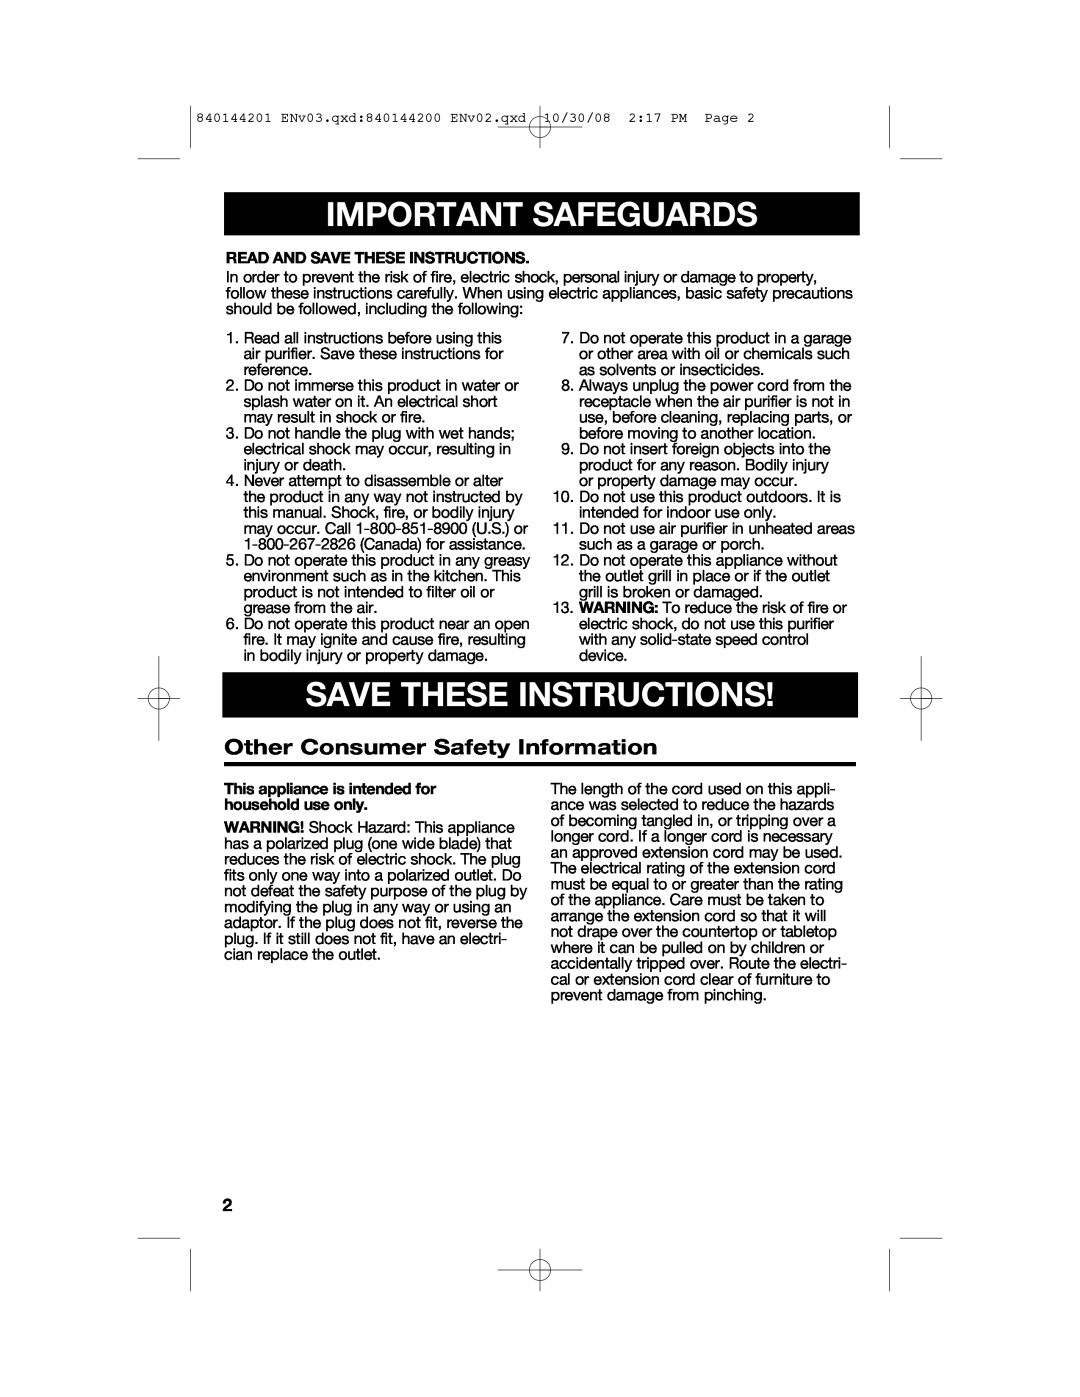 Hamilton Beach 840144201, 04992F manual Important Safeguards, Save These Instructions, Other Consumer Safety Information 